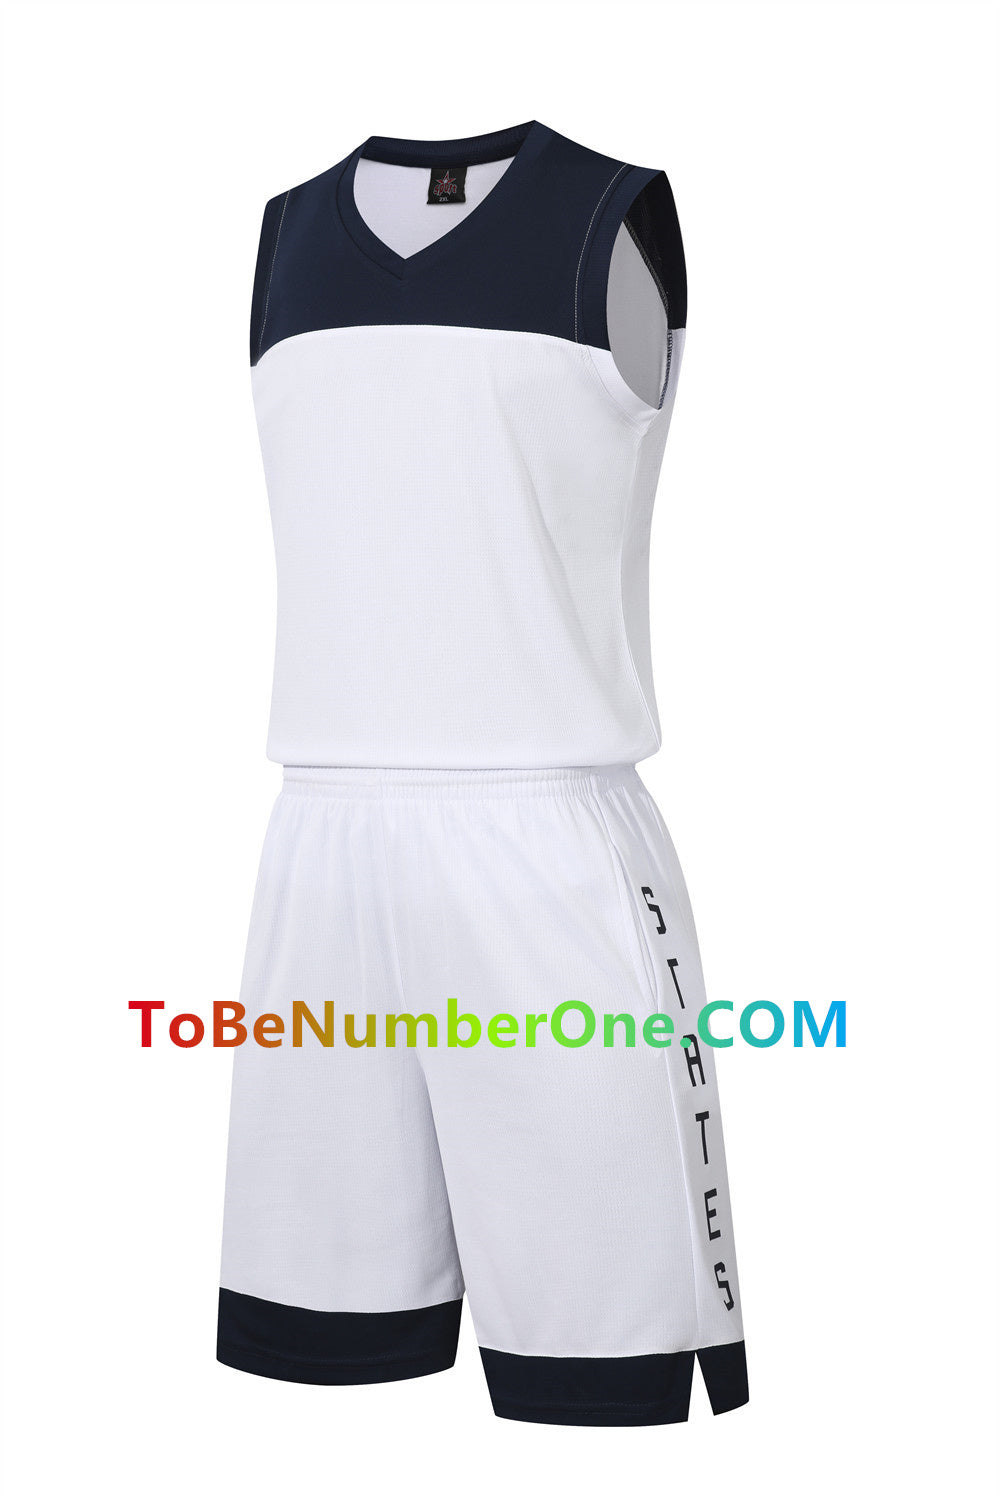 Customize instock High Quality Quick-drying basketball uniforms print with team name , player and number.  jerseys&shorts with pocket A107# USA jerseys